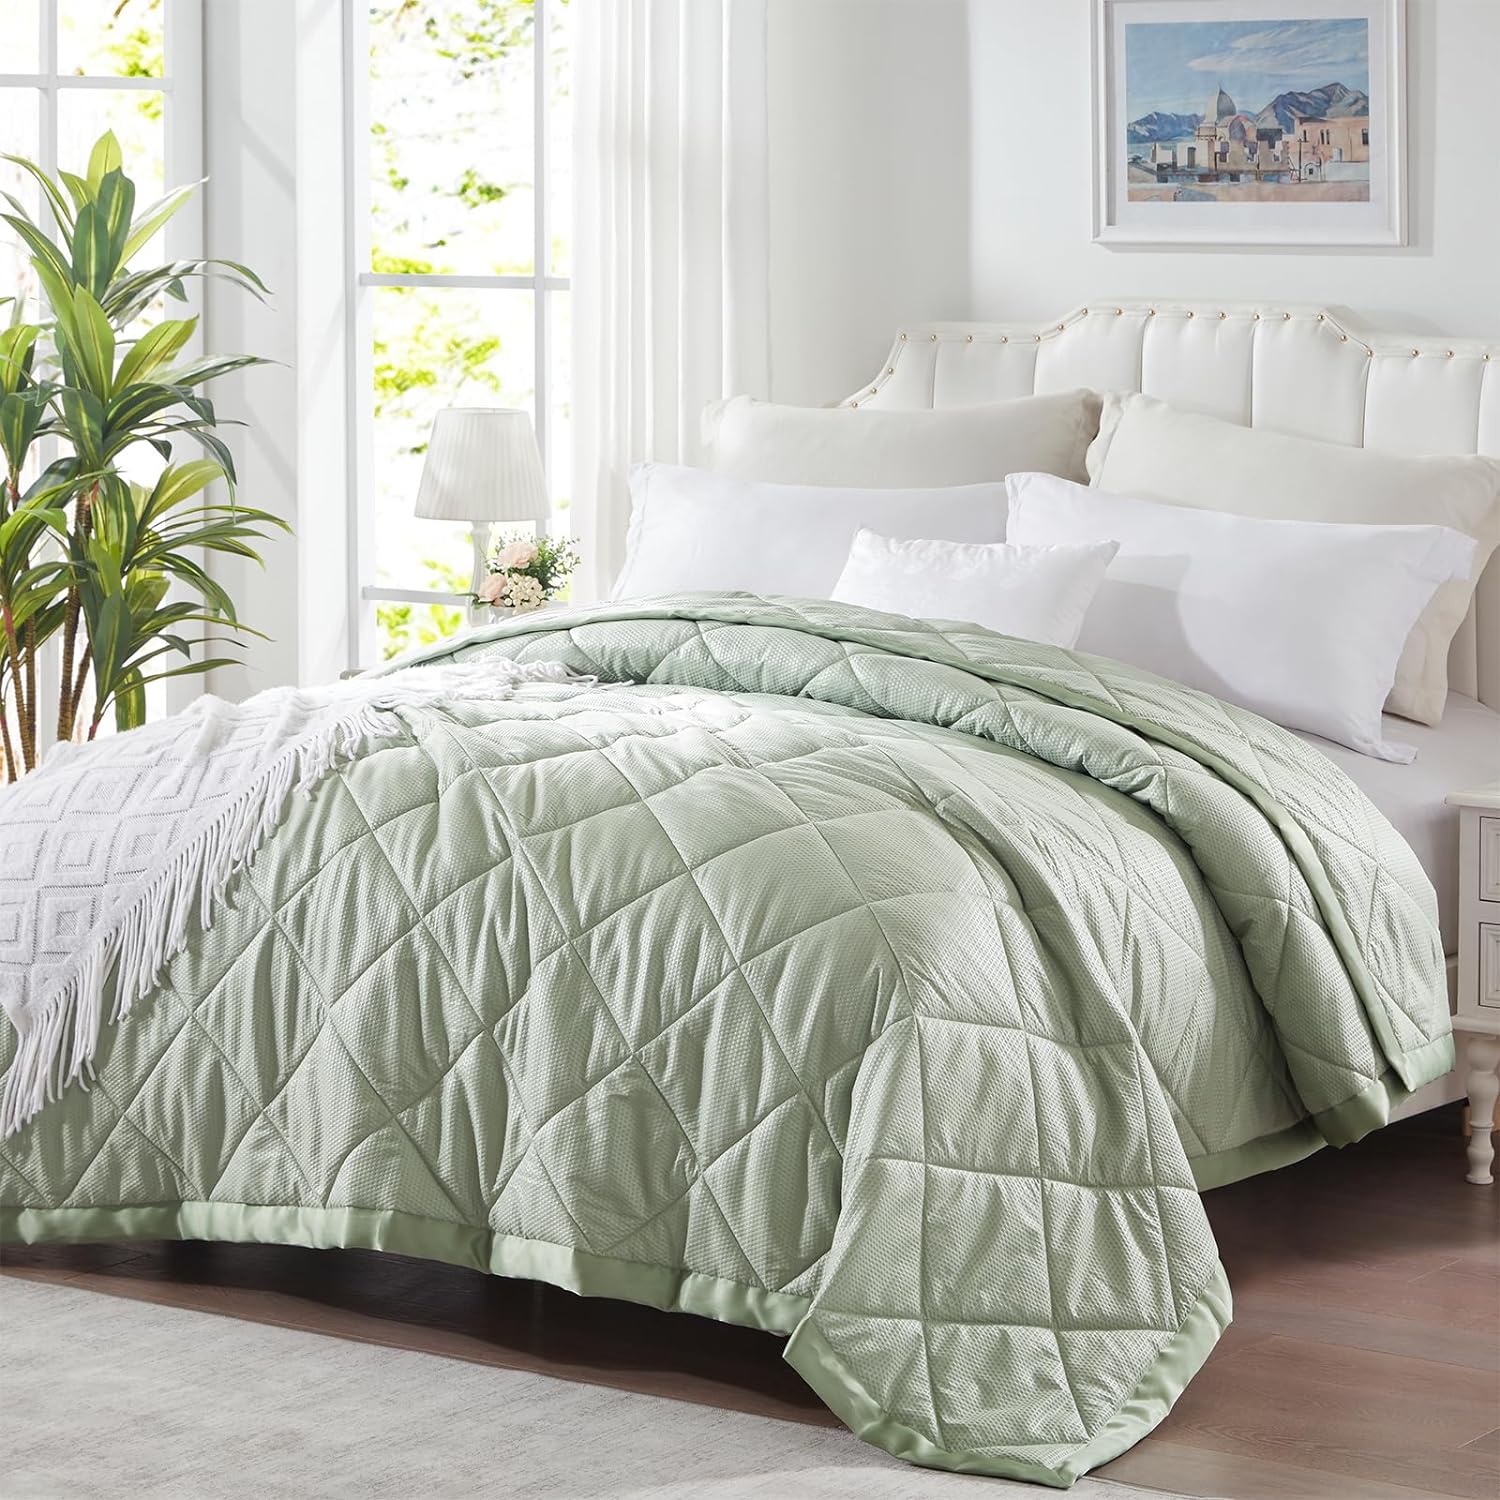 Great Choice Products Queen Size Blanket - Down Alternative Blanket With Satin Trim - Sage Green Summer Lightweight Comforter Luxurious Microf…